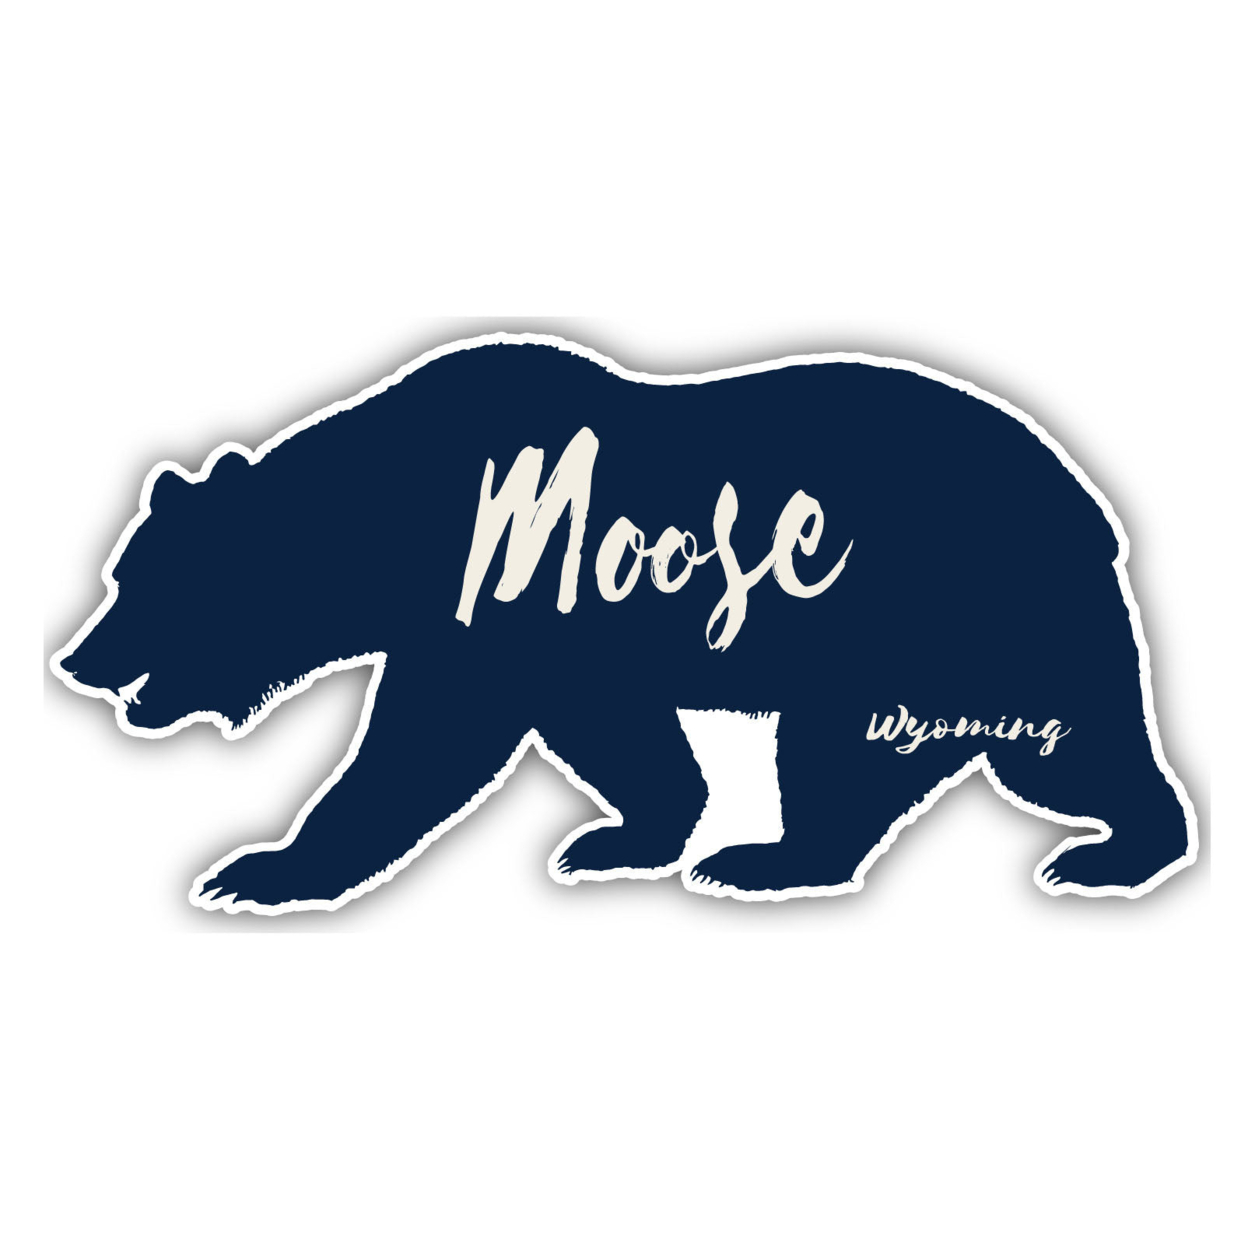 Moose Wyoming Souvenir Decorative Stickers (Choose Theme And Size) - Single Unit, 2-Inch, Bear